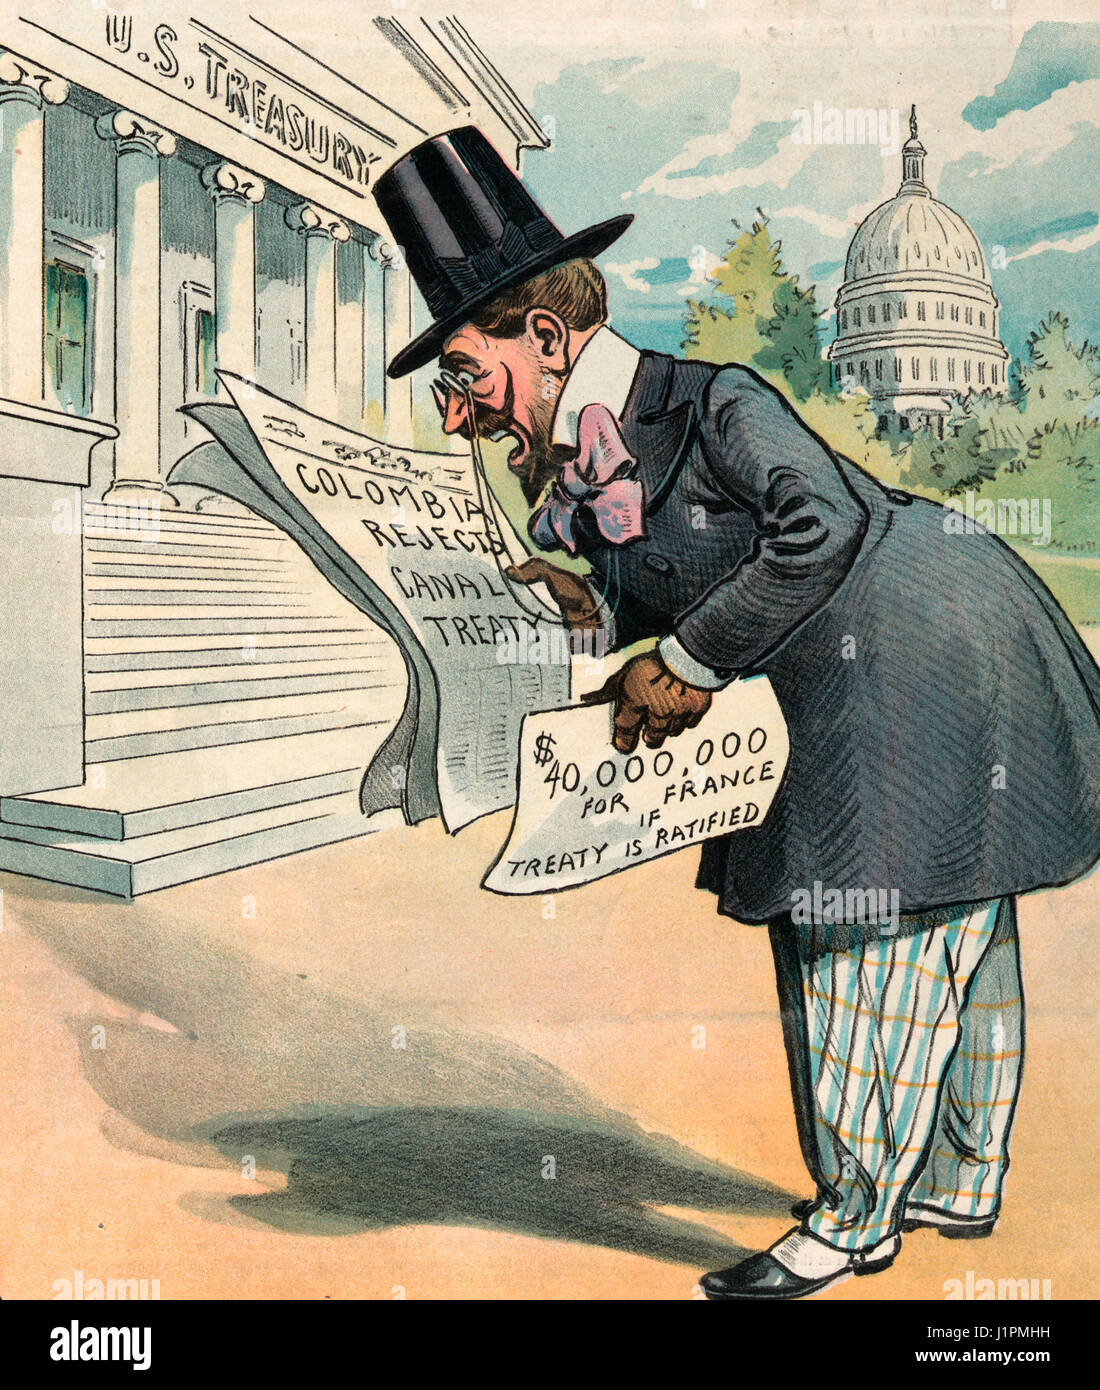 "Sacre bleu!" Illustration shows a Frenchman standing outside the U.S. Treasury building, he is holding in one hand a newspaper that states "Colombia Rejects Canal Treaty" and in the other hand a paper labeled "40,000,000 for France if Treaty is Ratified". It appears that he was about to cash-in a promissory note for $40 million, only to discover at the last moment that it is worthless. Political Cartoon, 1903 Stock Photo